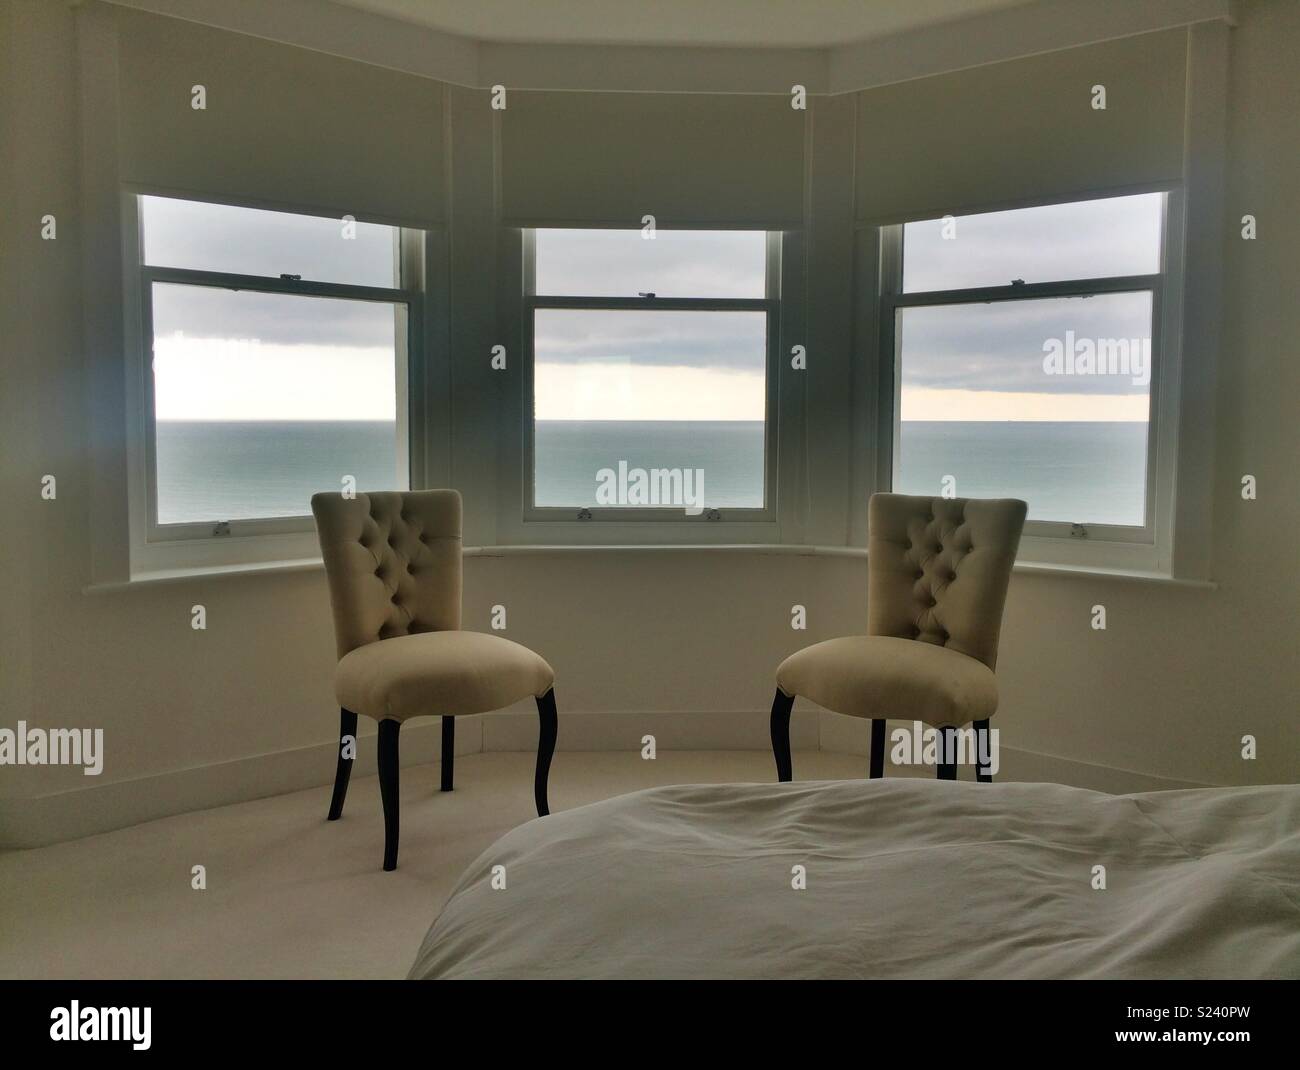 British seaside room with a view Stock Photo